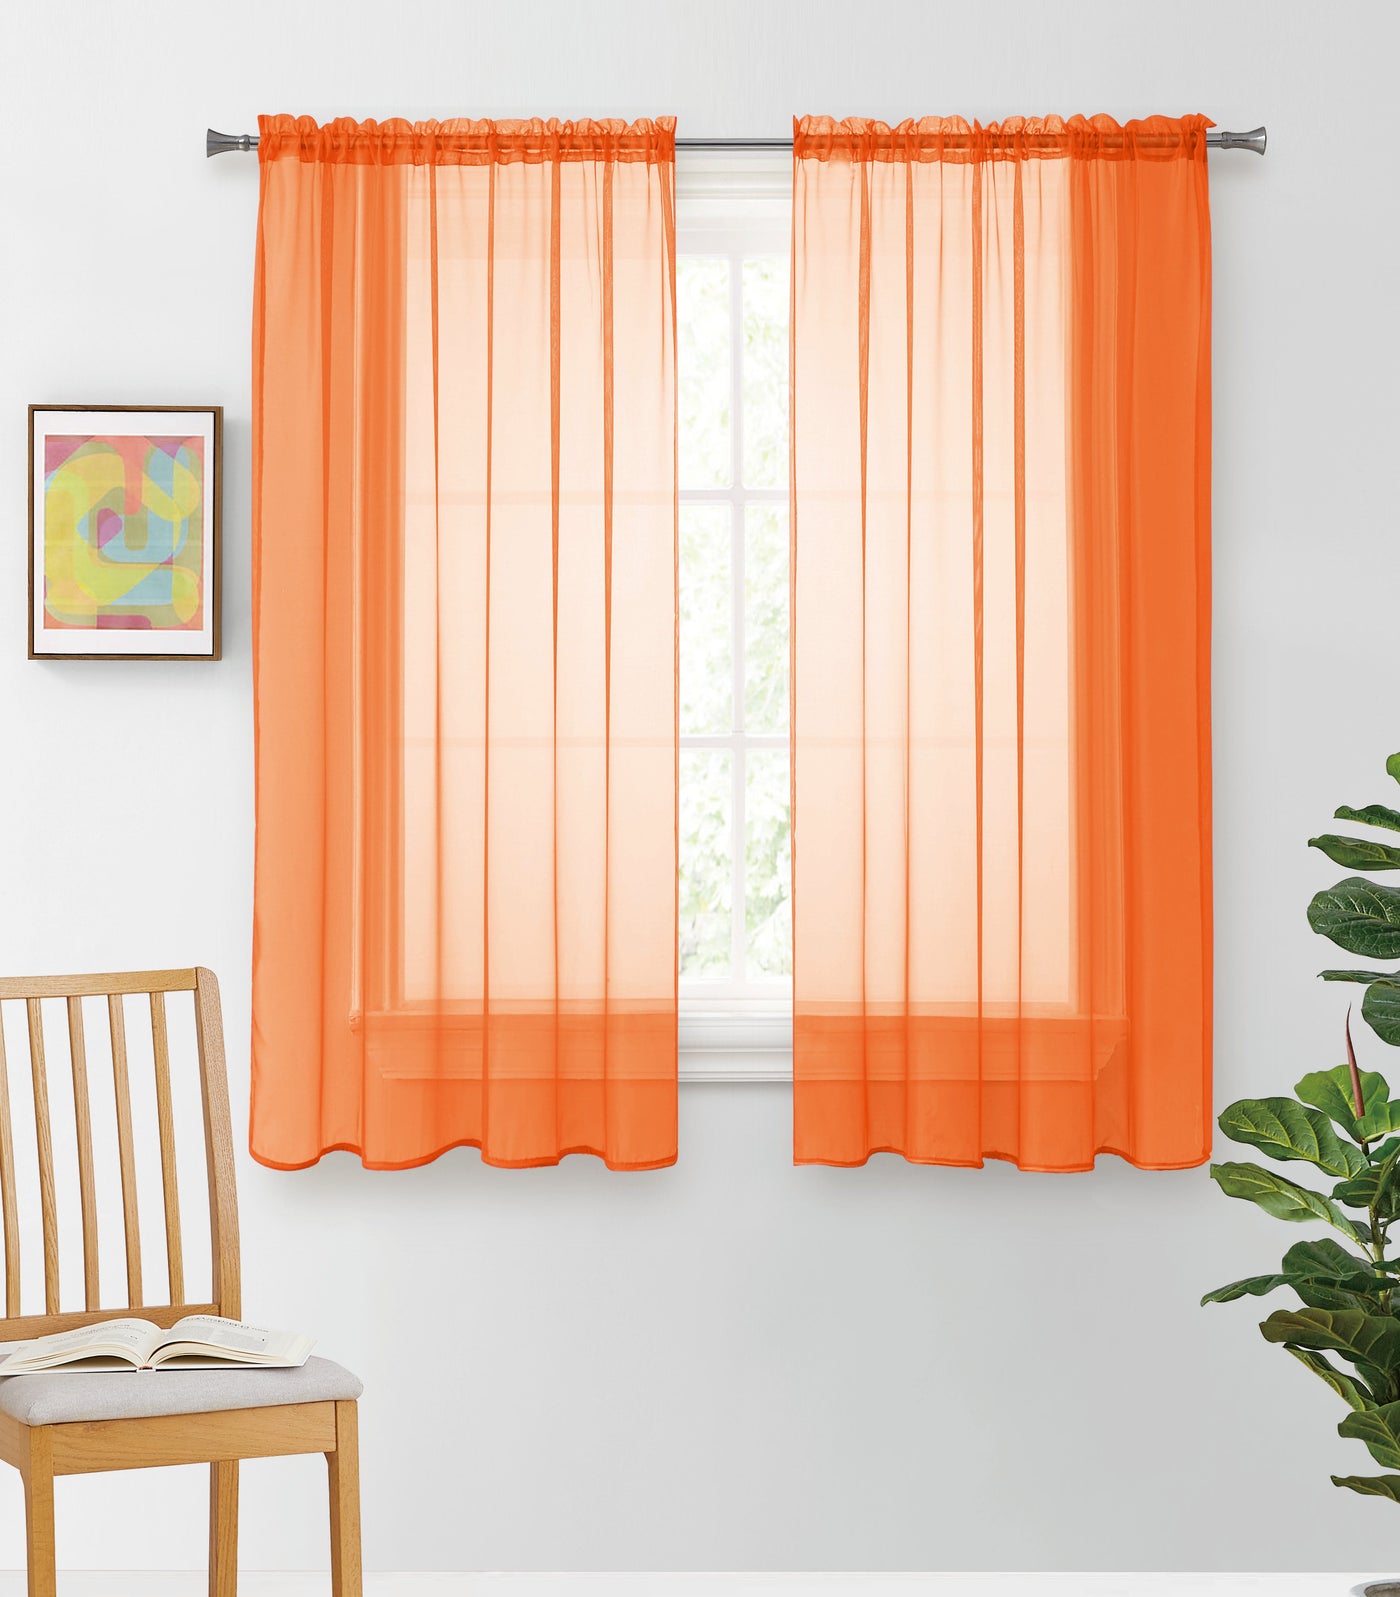 Solid Voile Rod Pocket Sheer Curtains for Bedroom Drapes Set of 2 45" Curtains for Bedroom Panels Window Treatment Home Decor 45" - Jenin-Home-Furnishing.CURTAINS